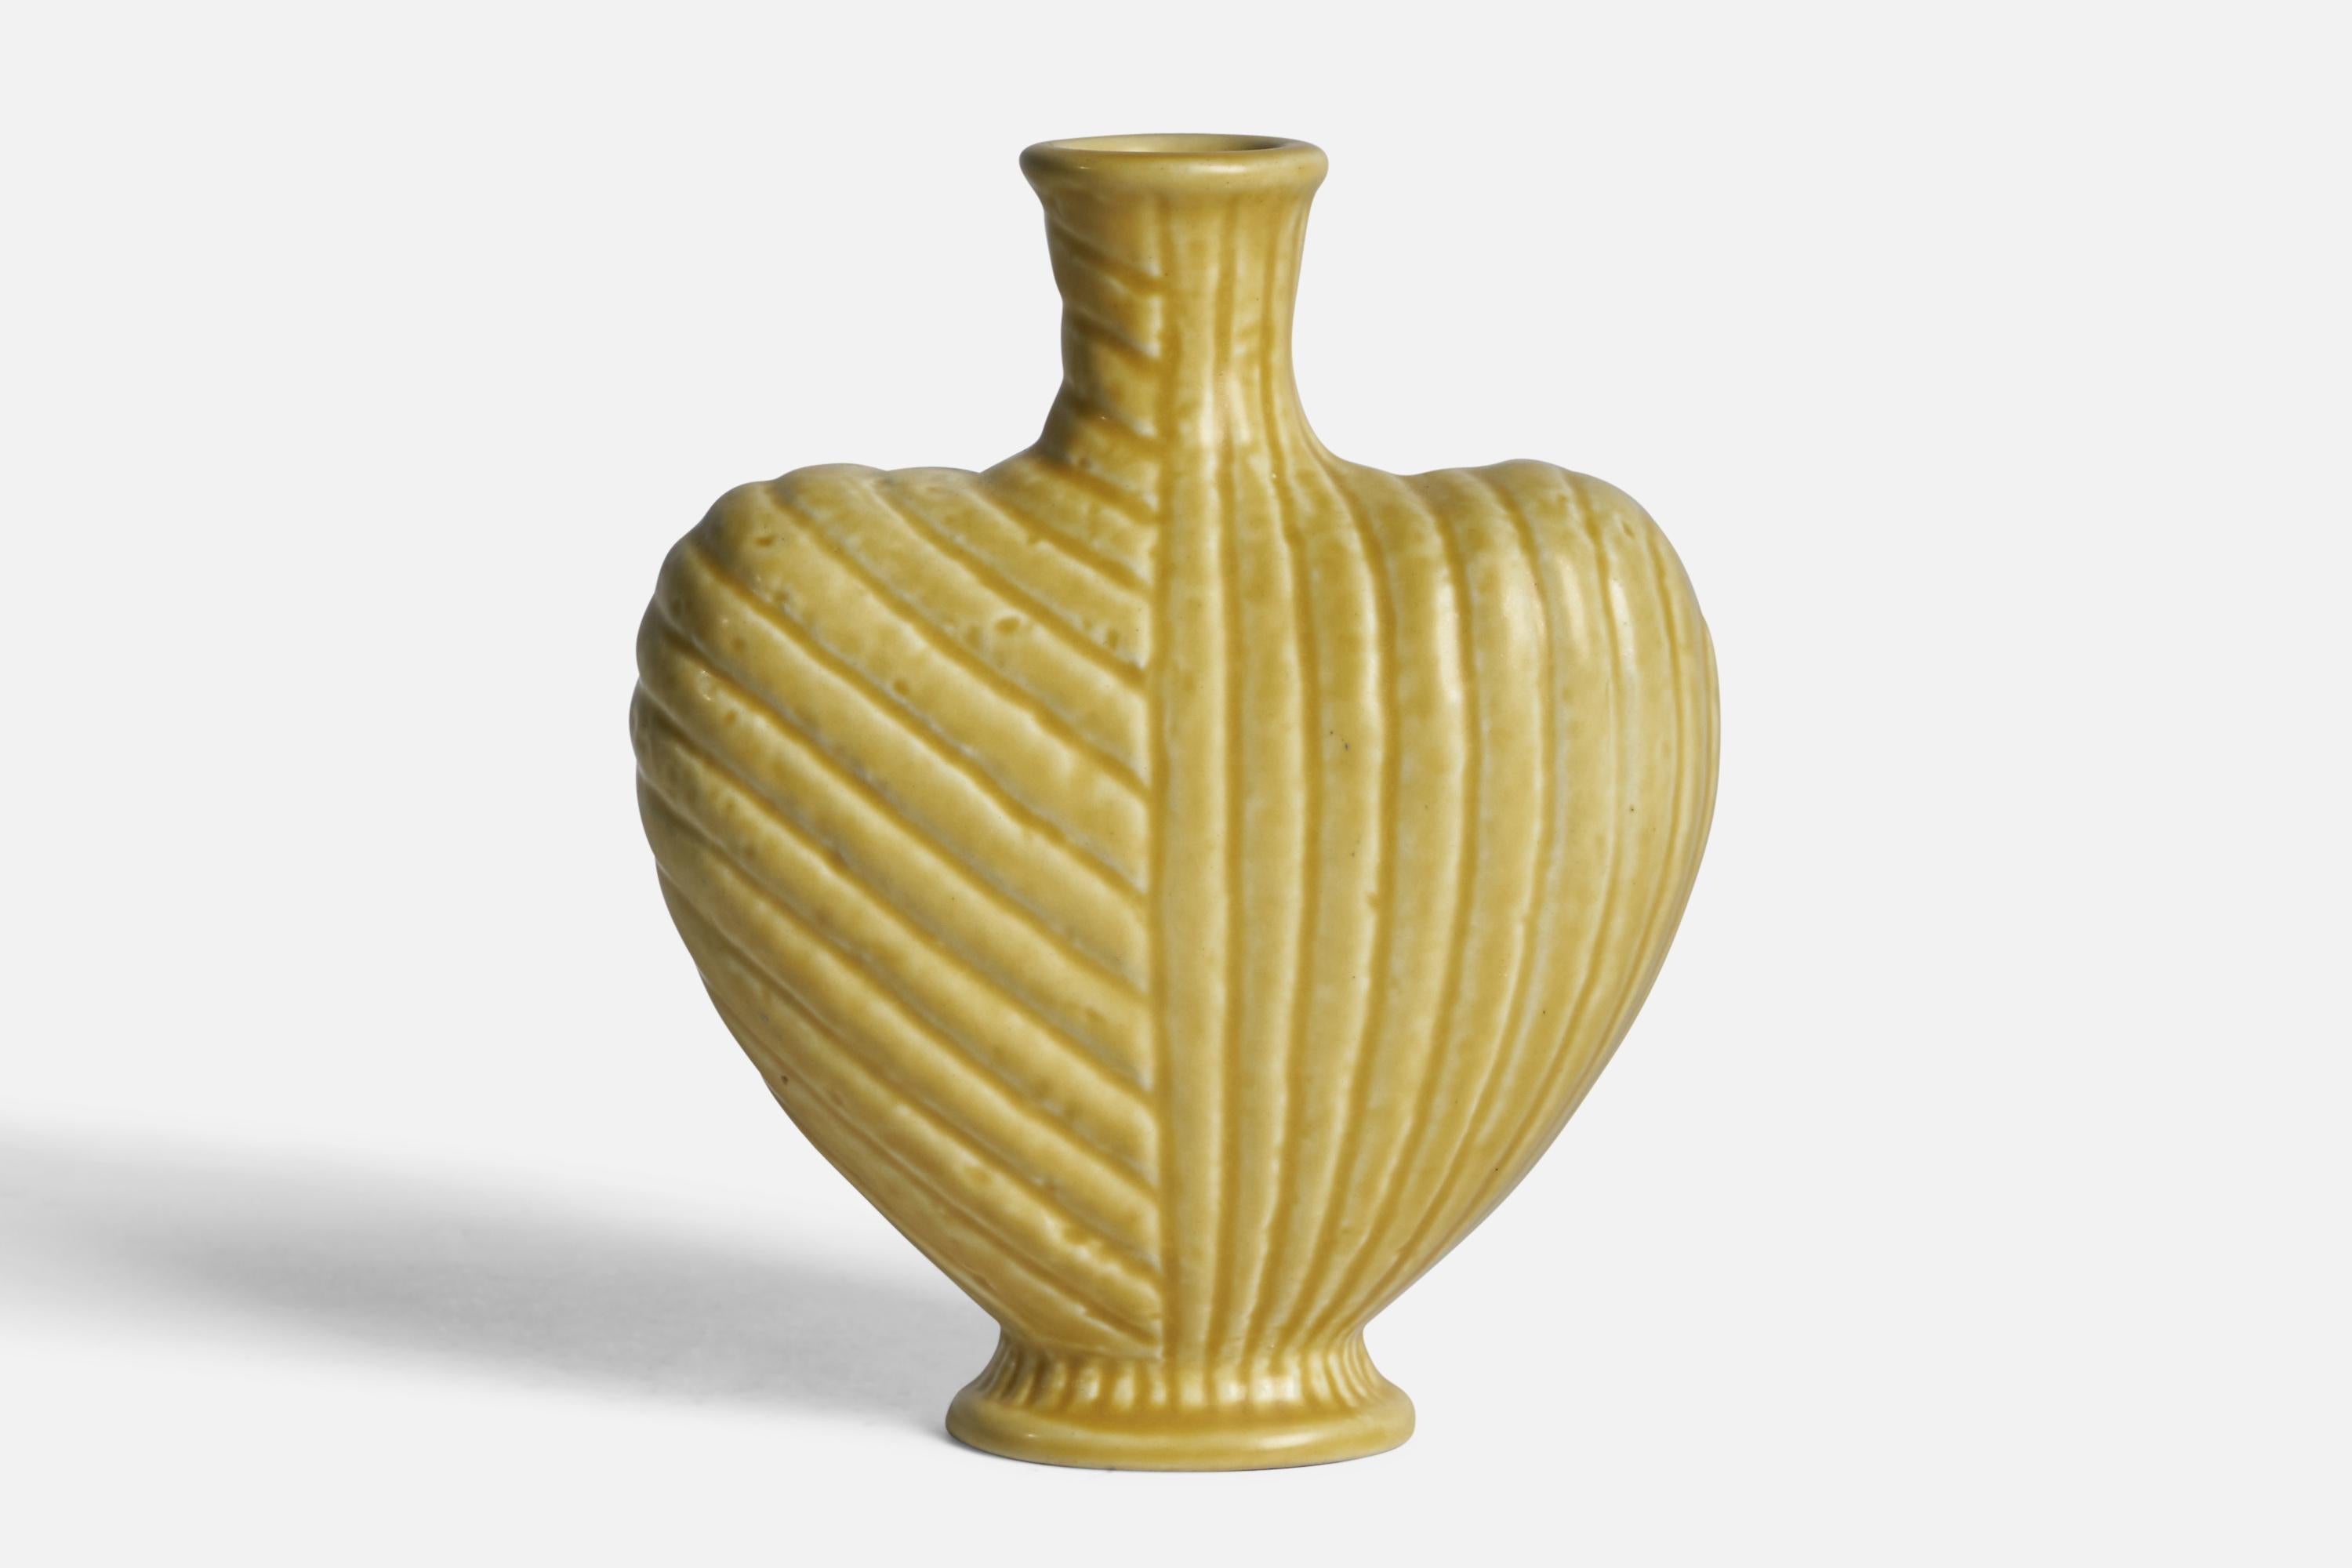 A yellow-glazed stoneware vase designed by Gunnar Nylund and produced by Rörstrand, Sweden, 1940s.